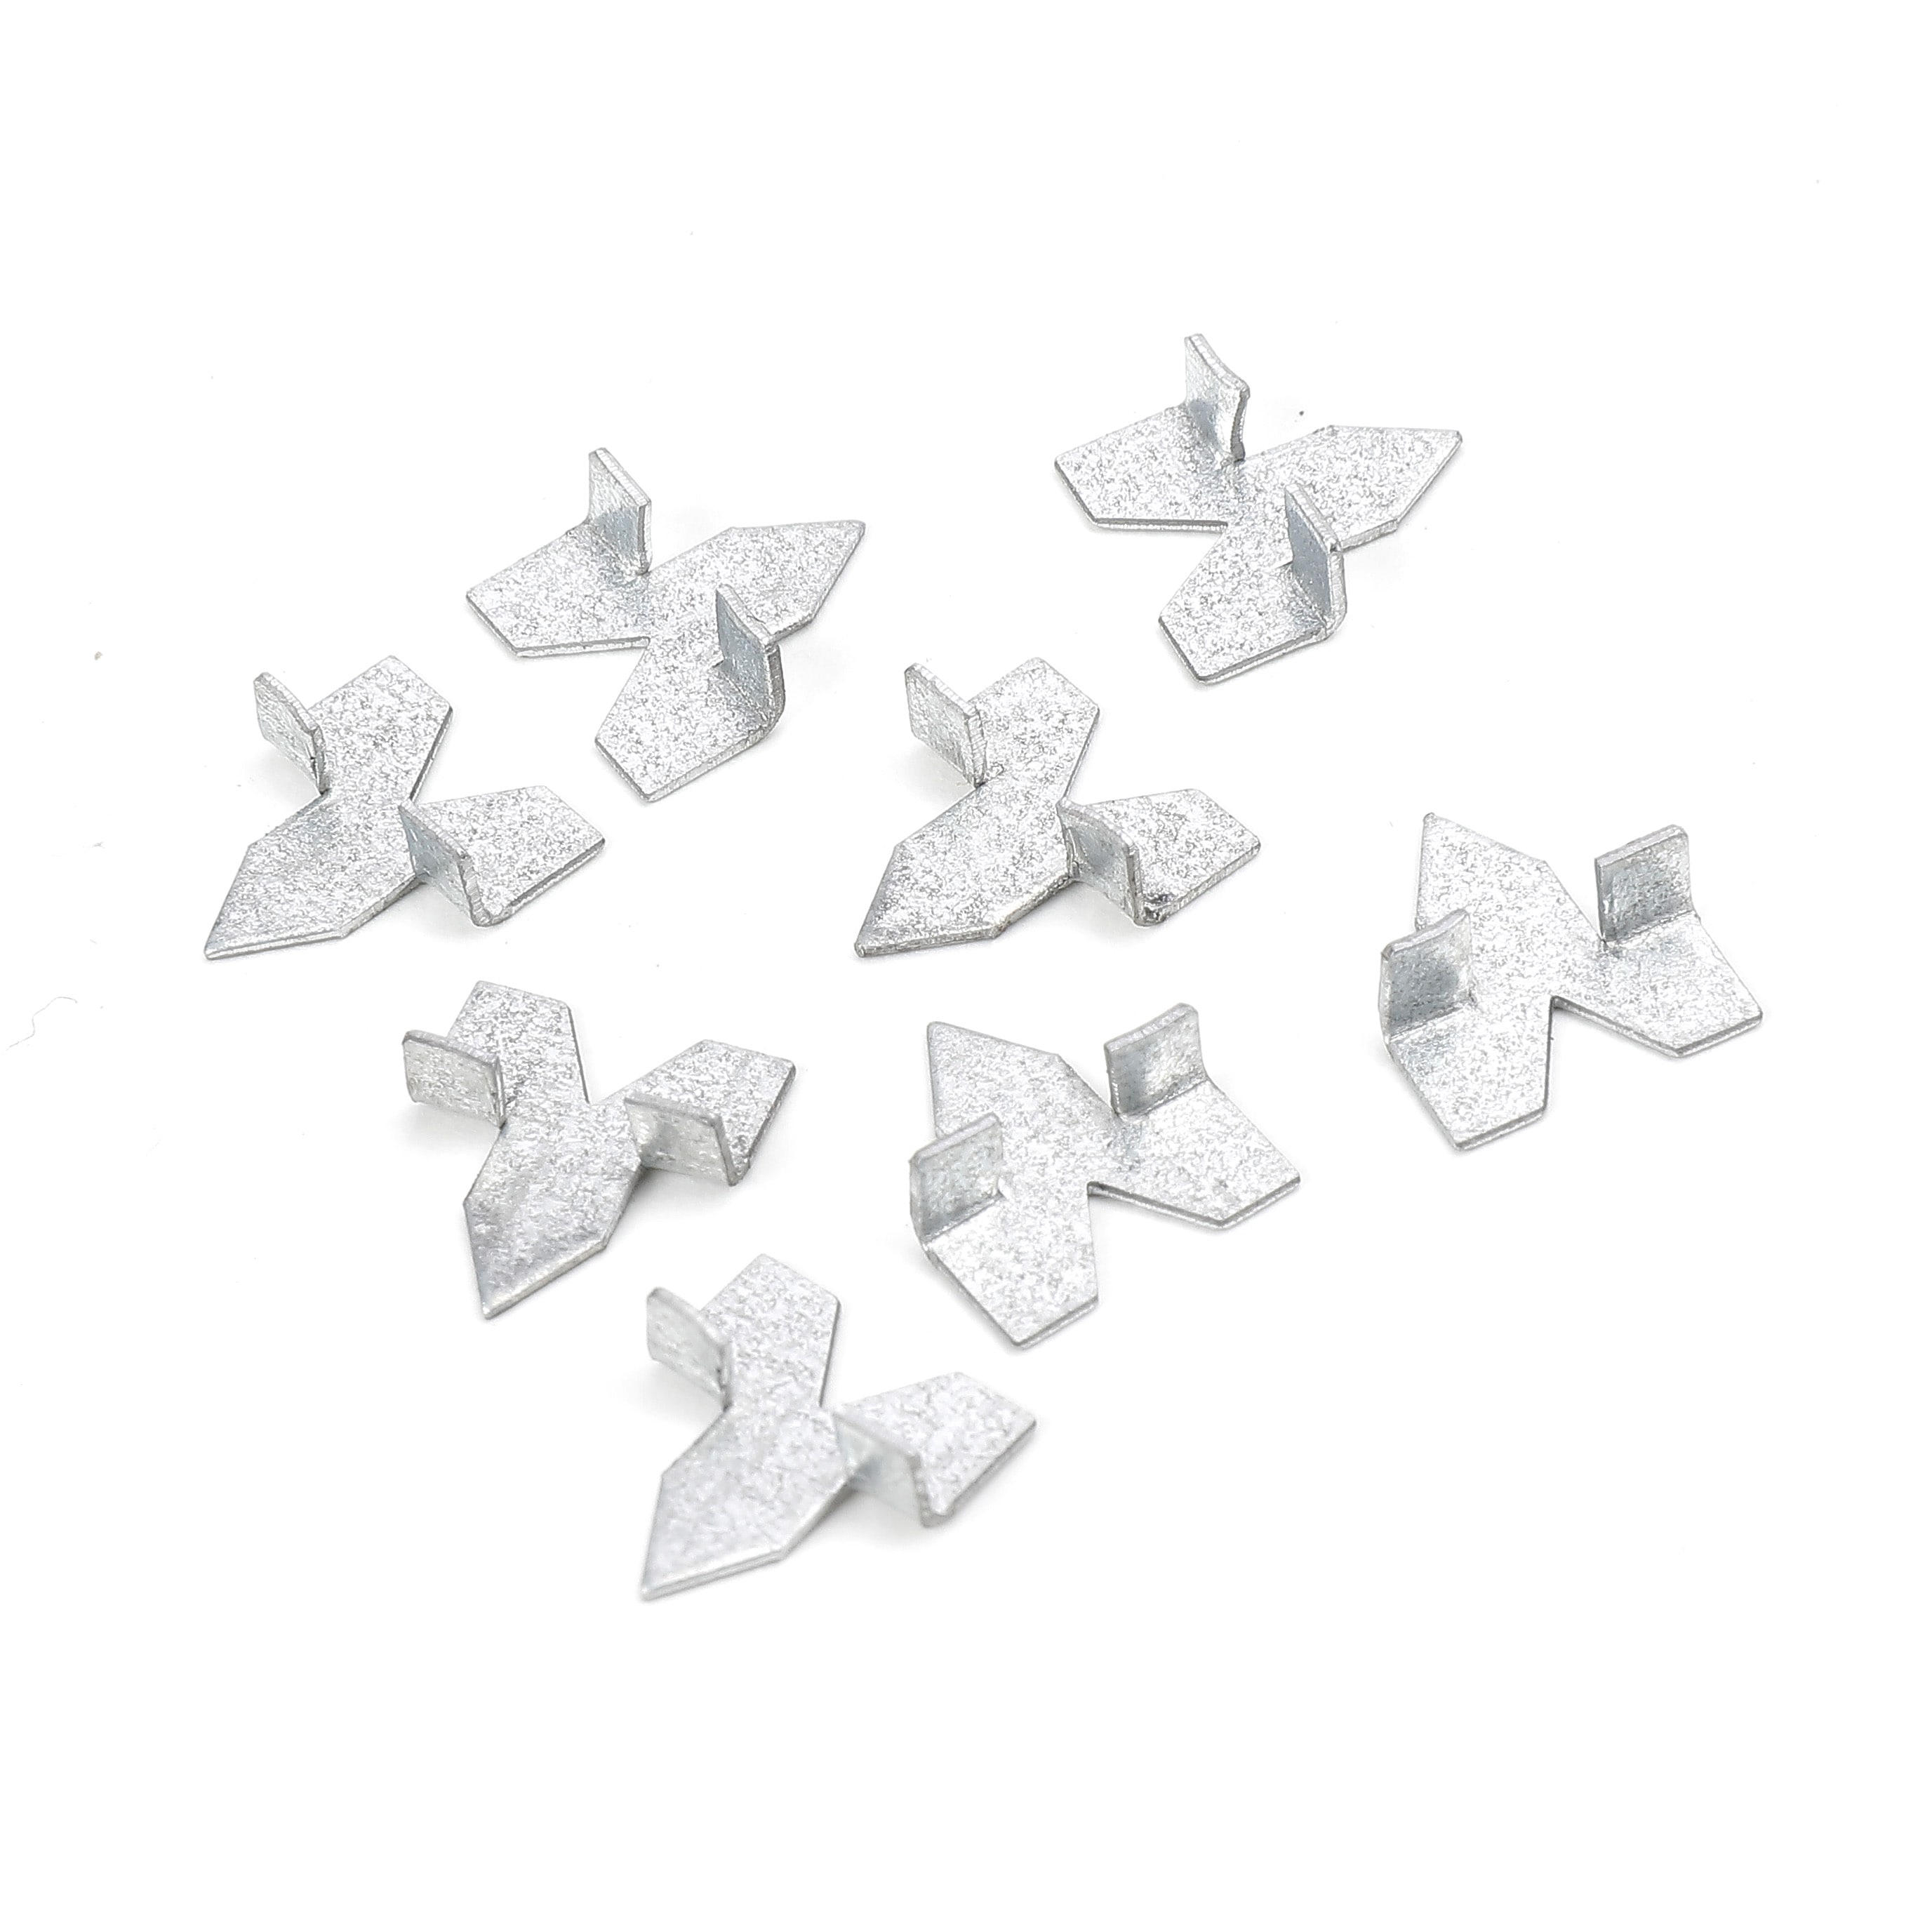 Blue Hawk 100-Pack 0.375-in 0.4375-in Steel Glazing Points at